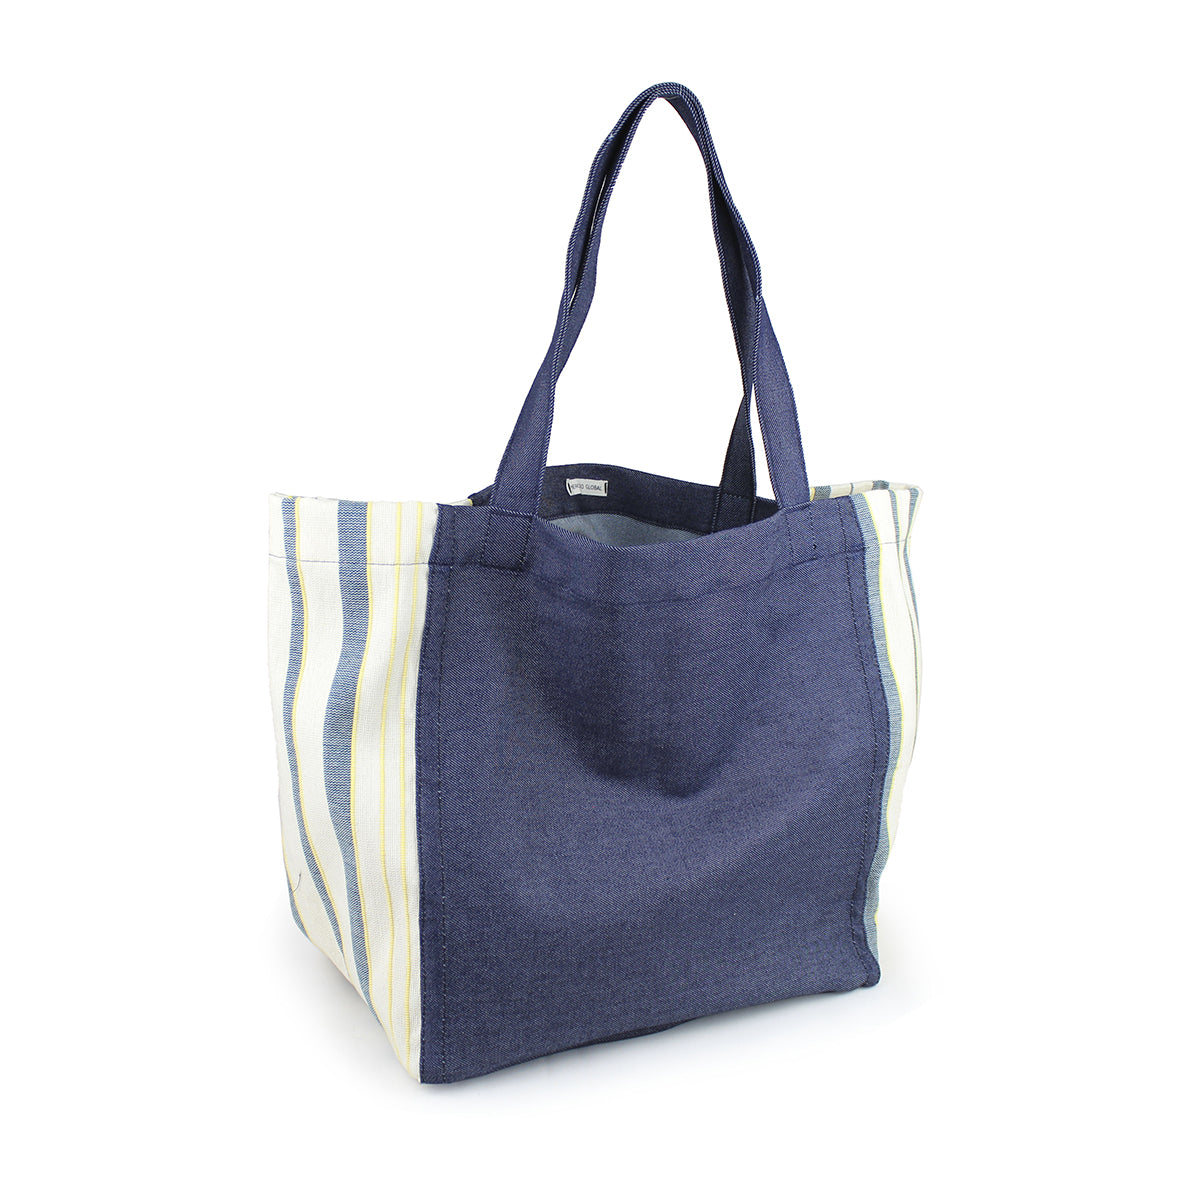 A left-sided angle of the hand woven artisan Blanca Tote in Denim Ocean pattern. The tote has a dark wash denim. The sides have a light blue, yellow, and white vertical striped fabric. 